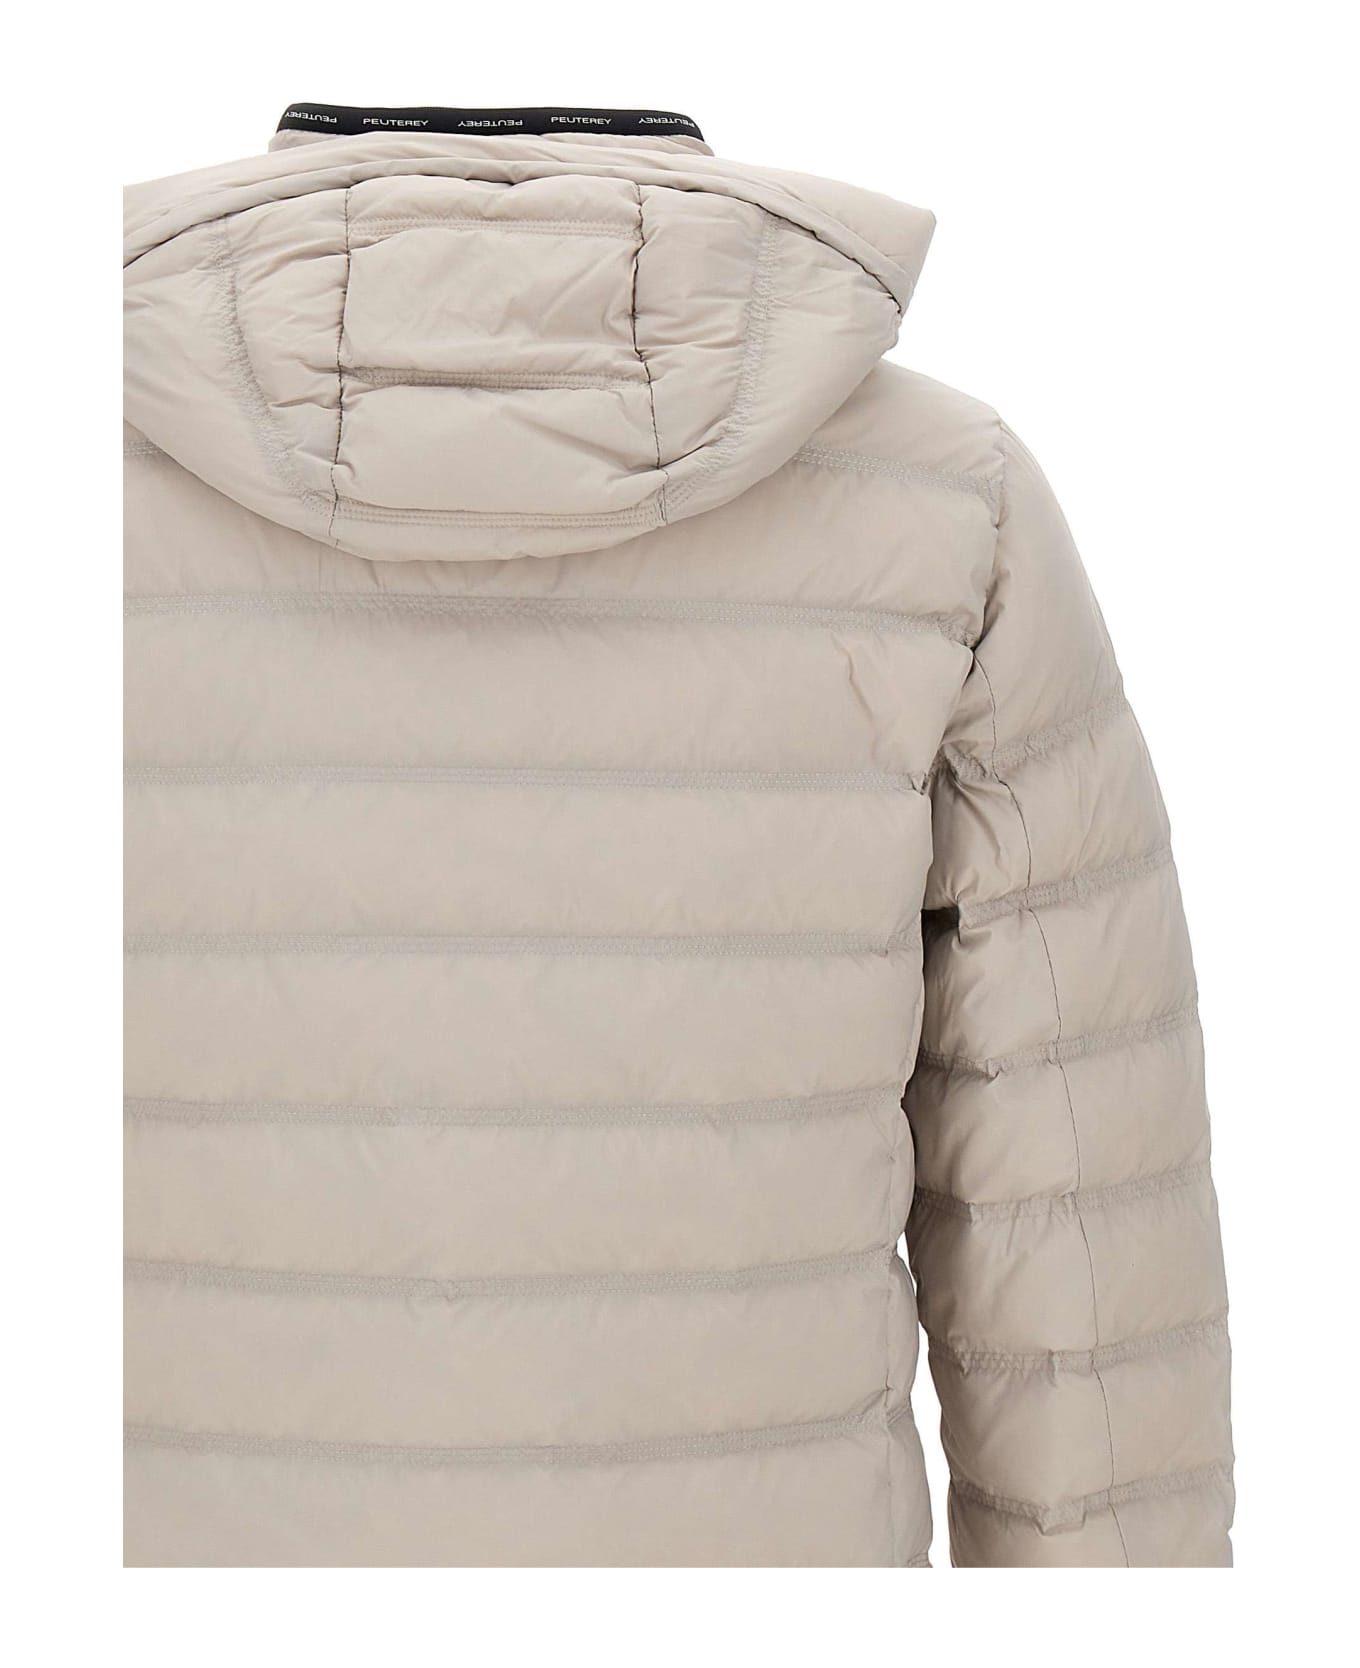 Peuterey 'boggs Kn' Down Jacket - Ice